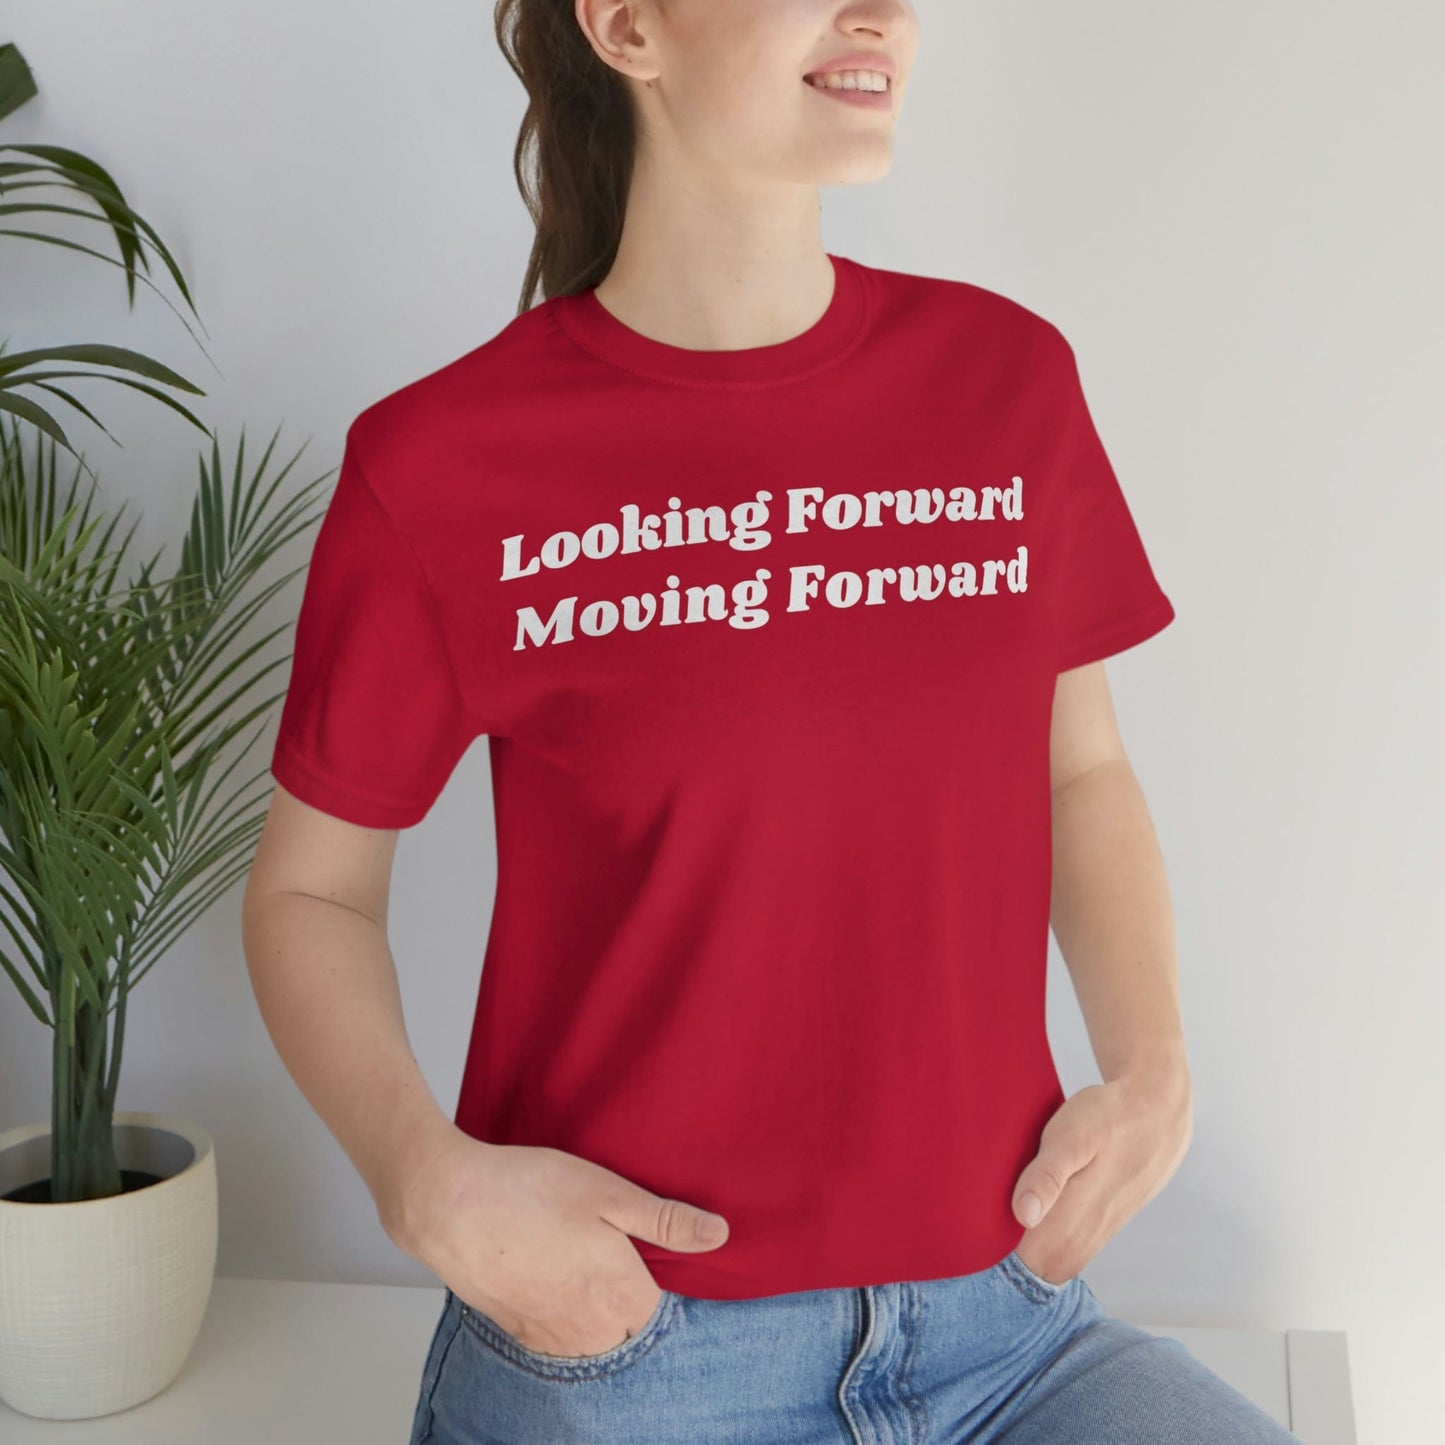 Looking Forward, Moving  Forward (Graphic White Text) Unisex Jersey Short Sleeve Tee - Style: Bella+Canvas 3001